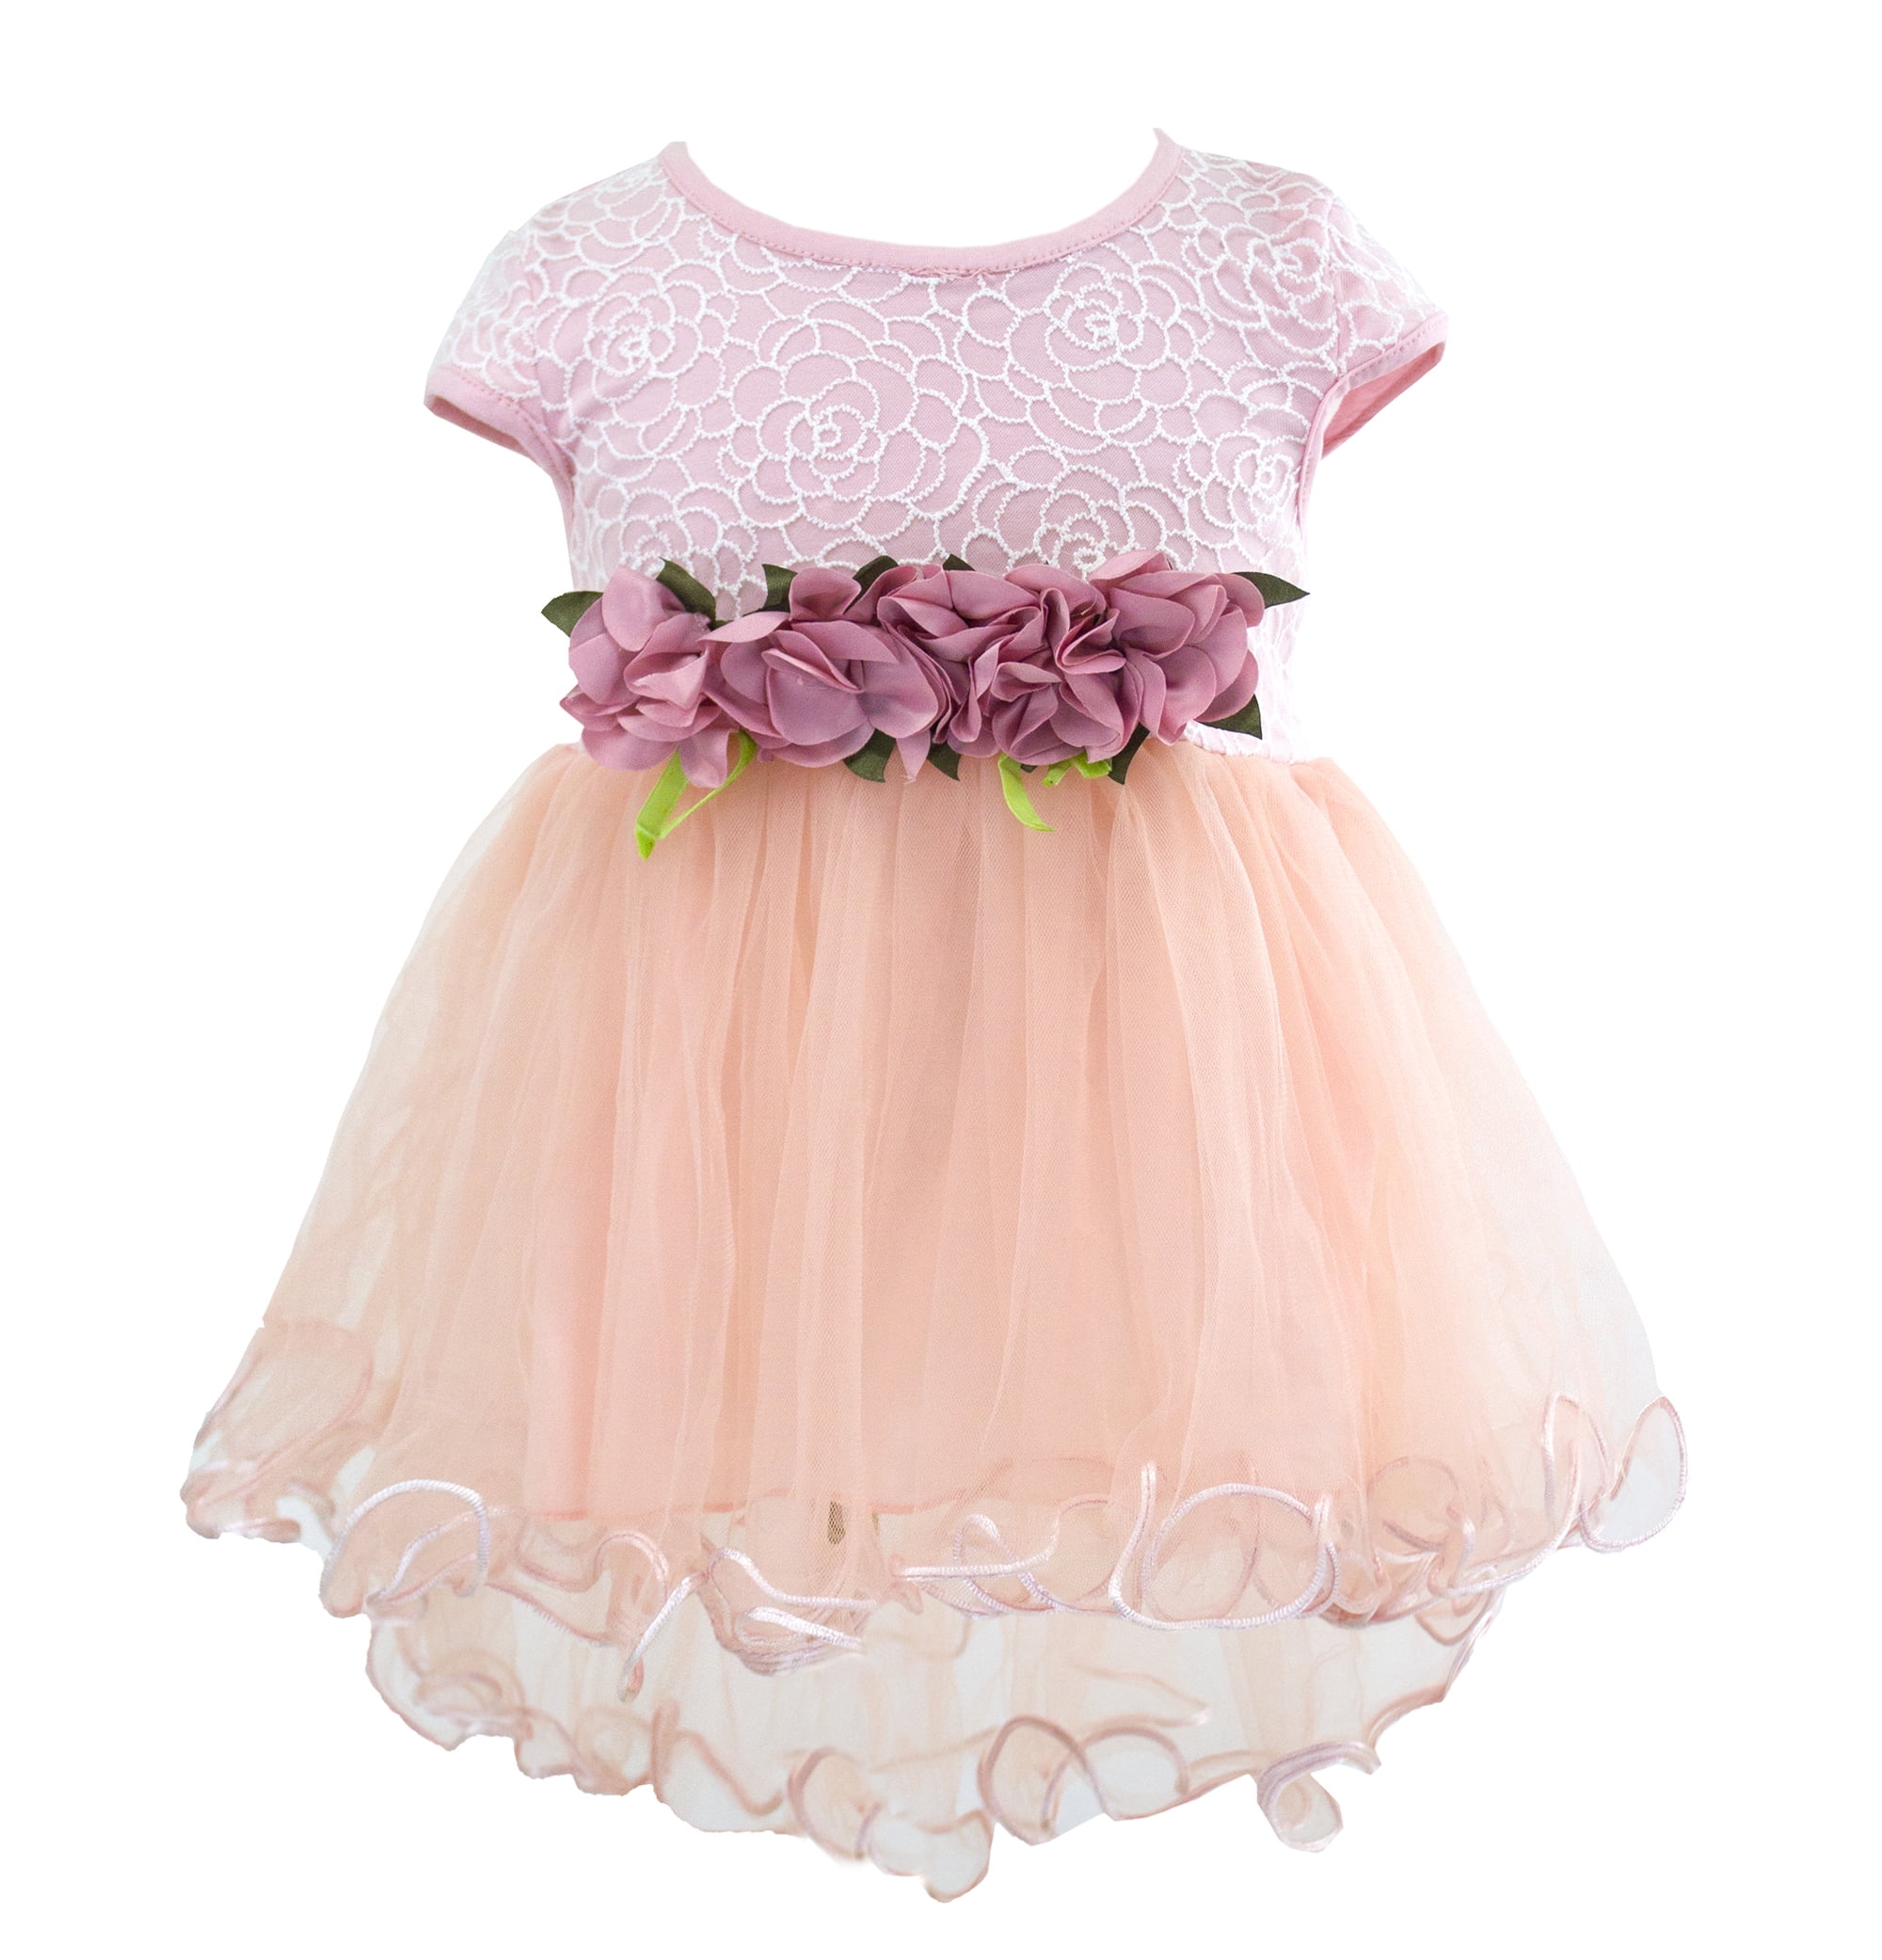 6 month baby girl party dress